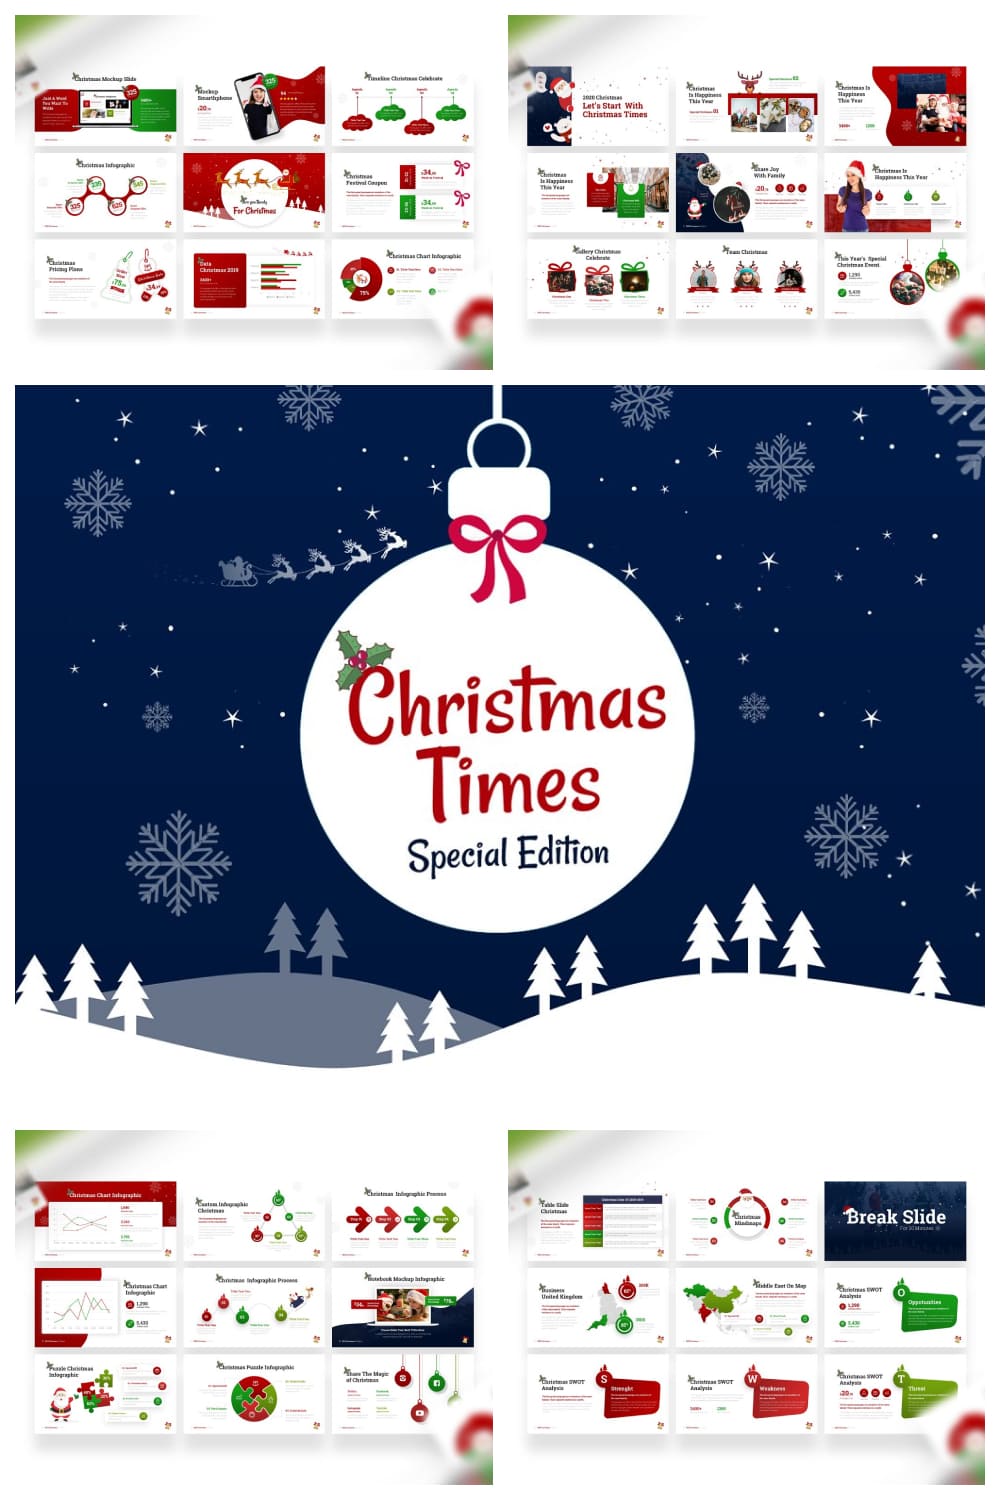 01 Christmas Times PowerPoint Template by MasterBundles Pinterest Collage Image.